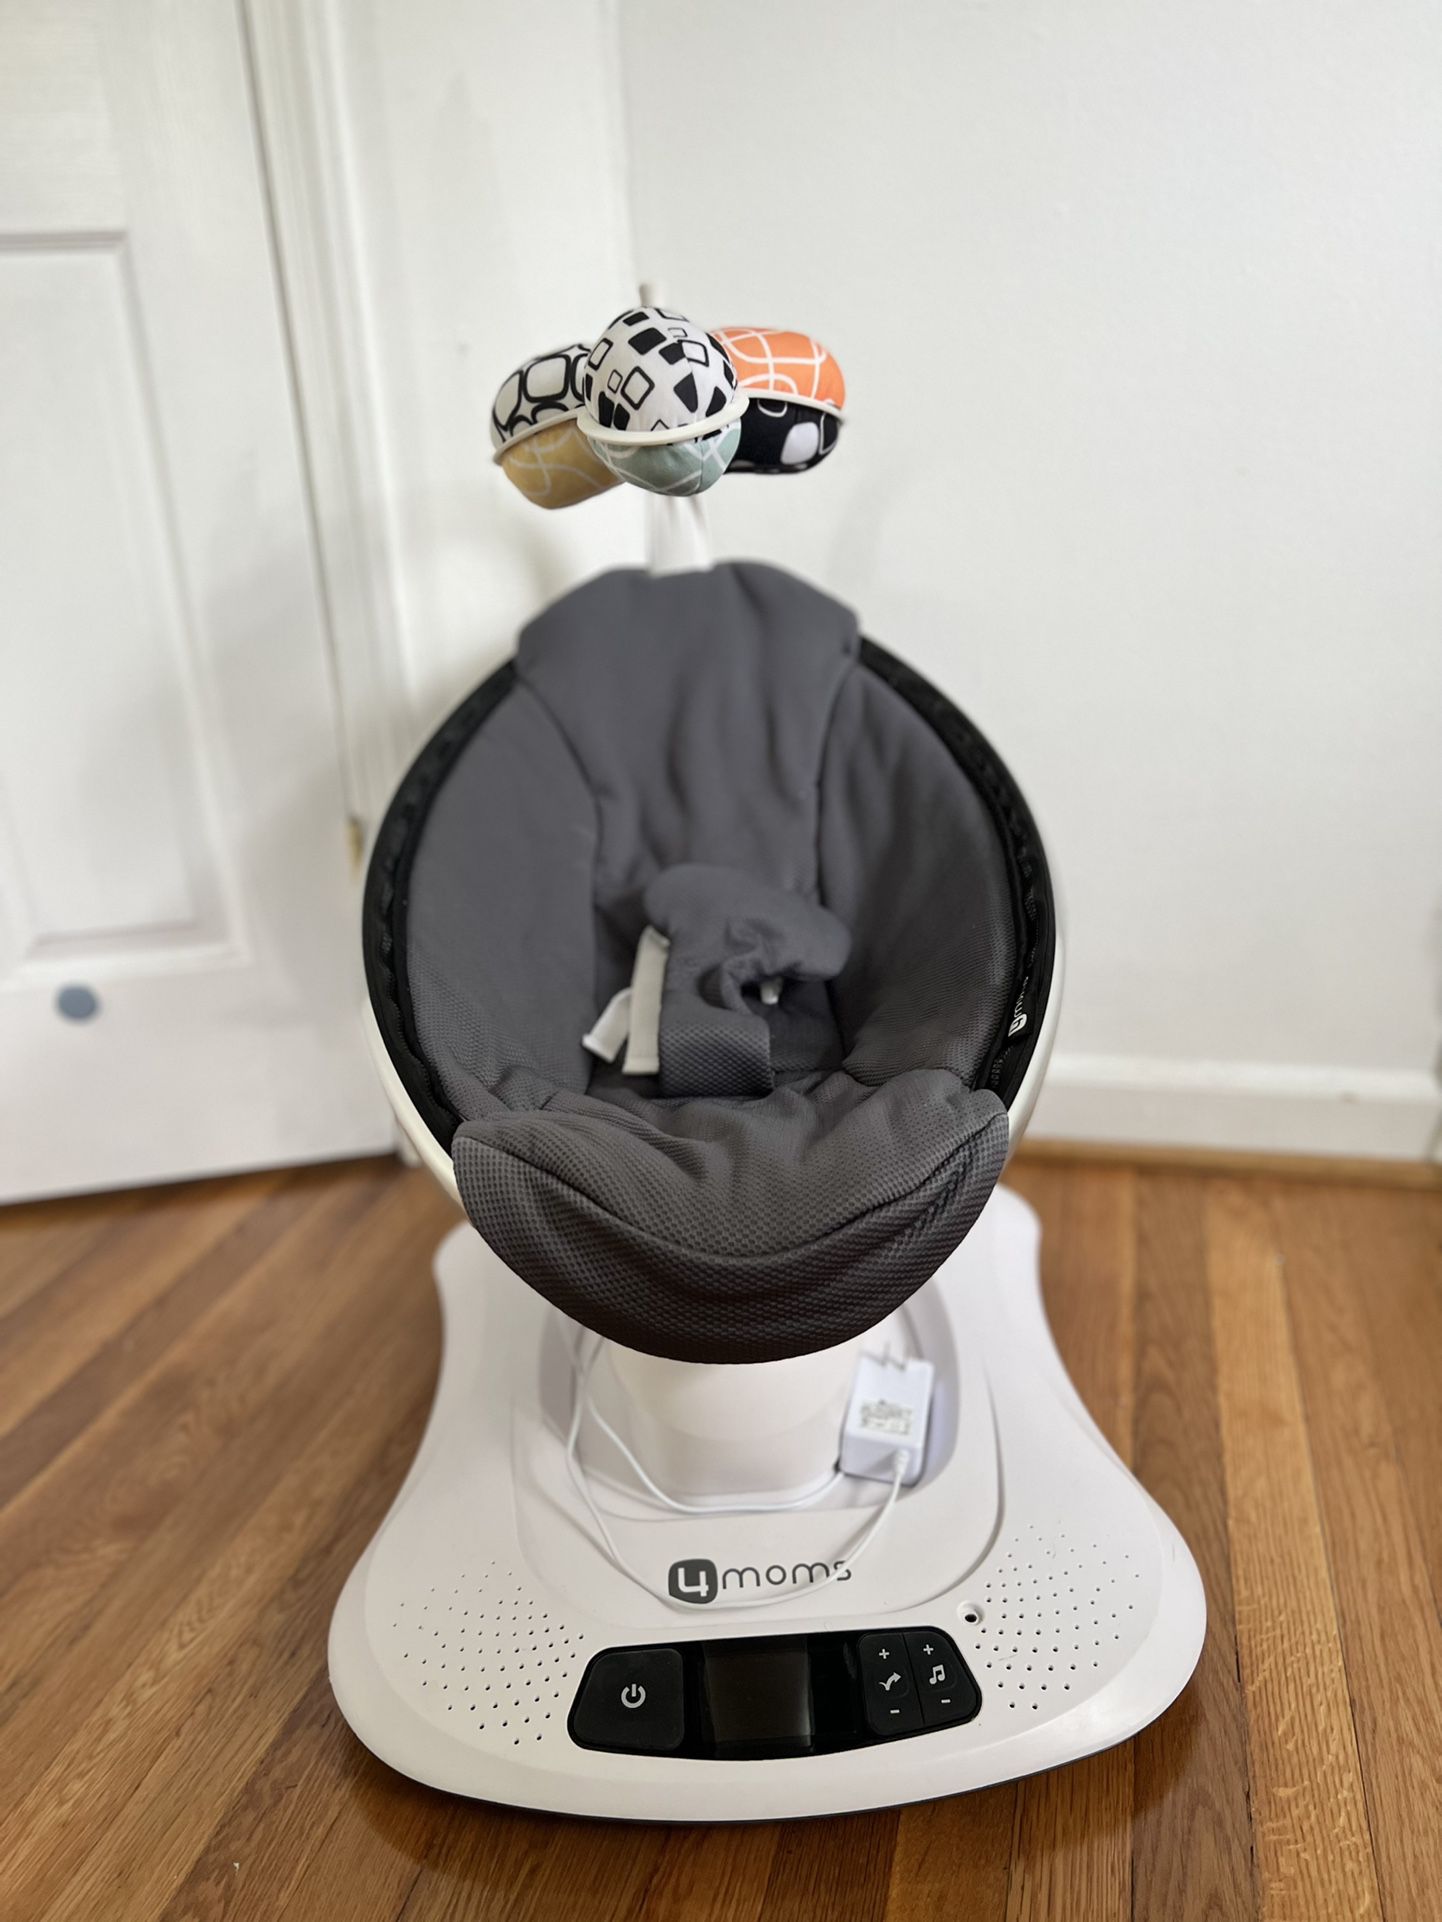 4moms mamaroo 4 5 unique motions bluetooth enabled multi-motion baby swing